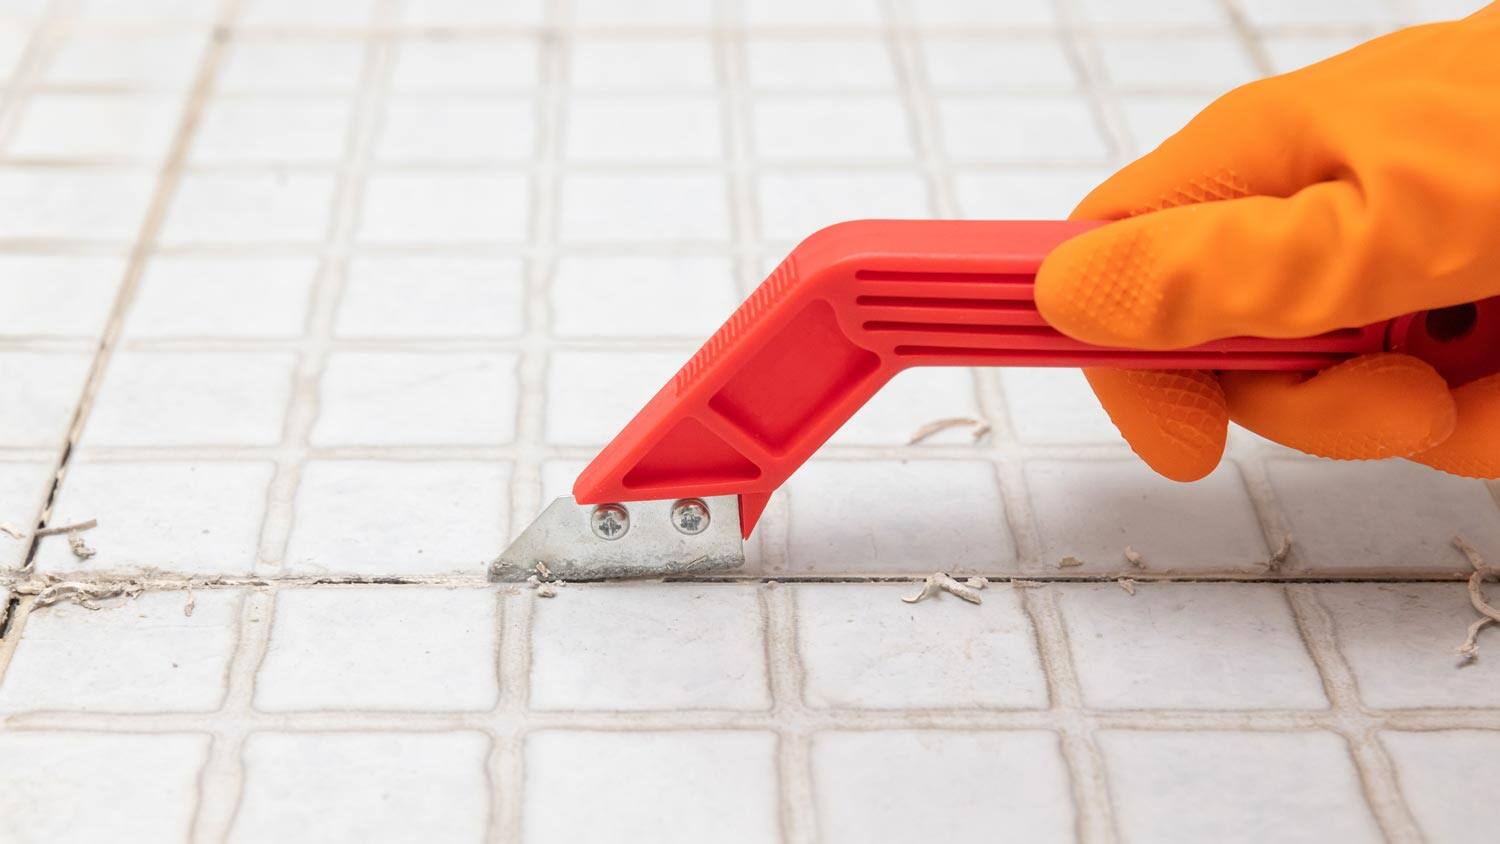 How To Remove Grout From Floor